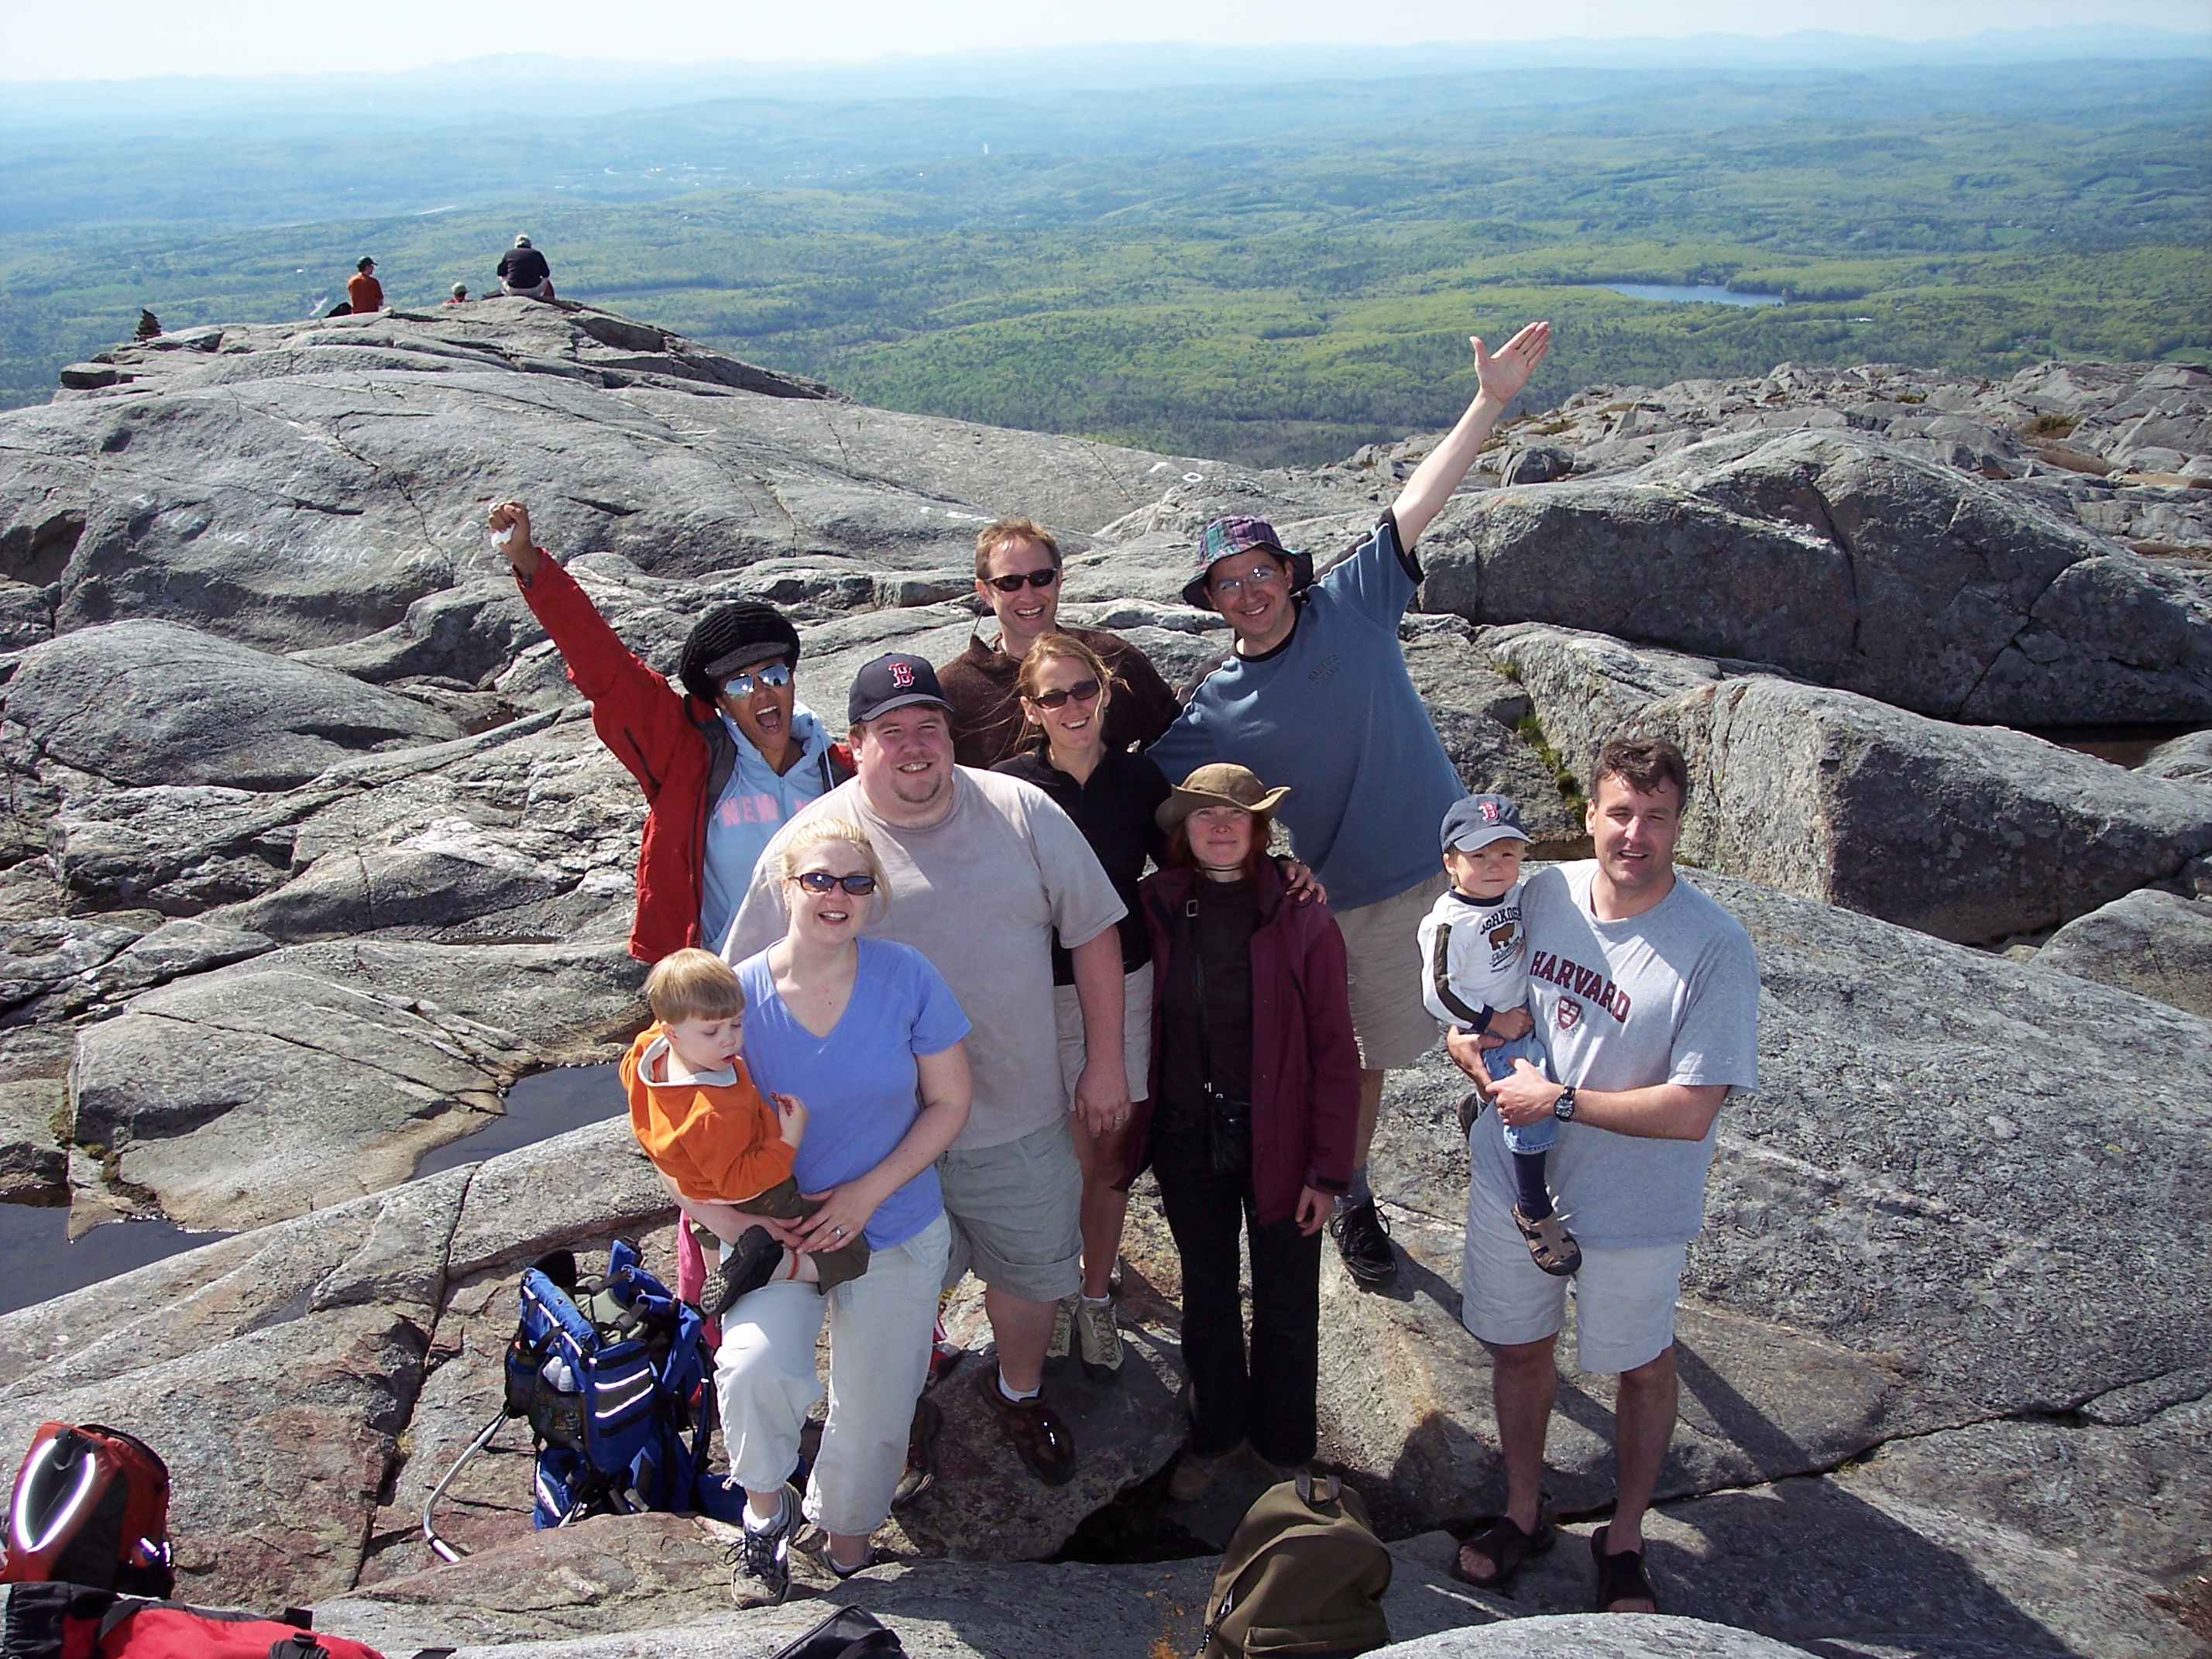 Chris Cousins, his wife Jennifer and their son Caleb were joined by fellow Nieman Fellows and affiliates for a hike of Mount Monadnock in New Hampshire in 2007 